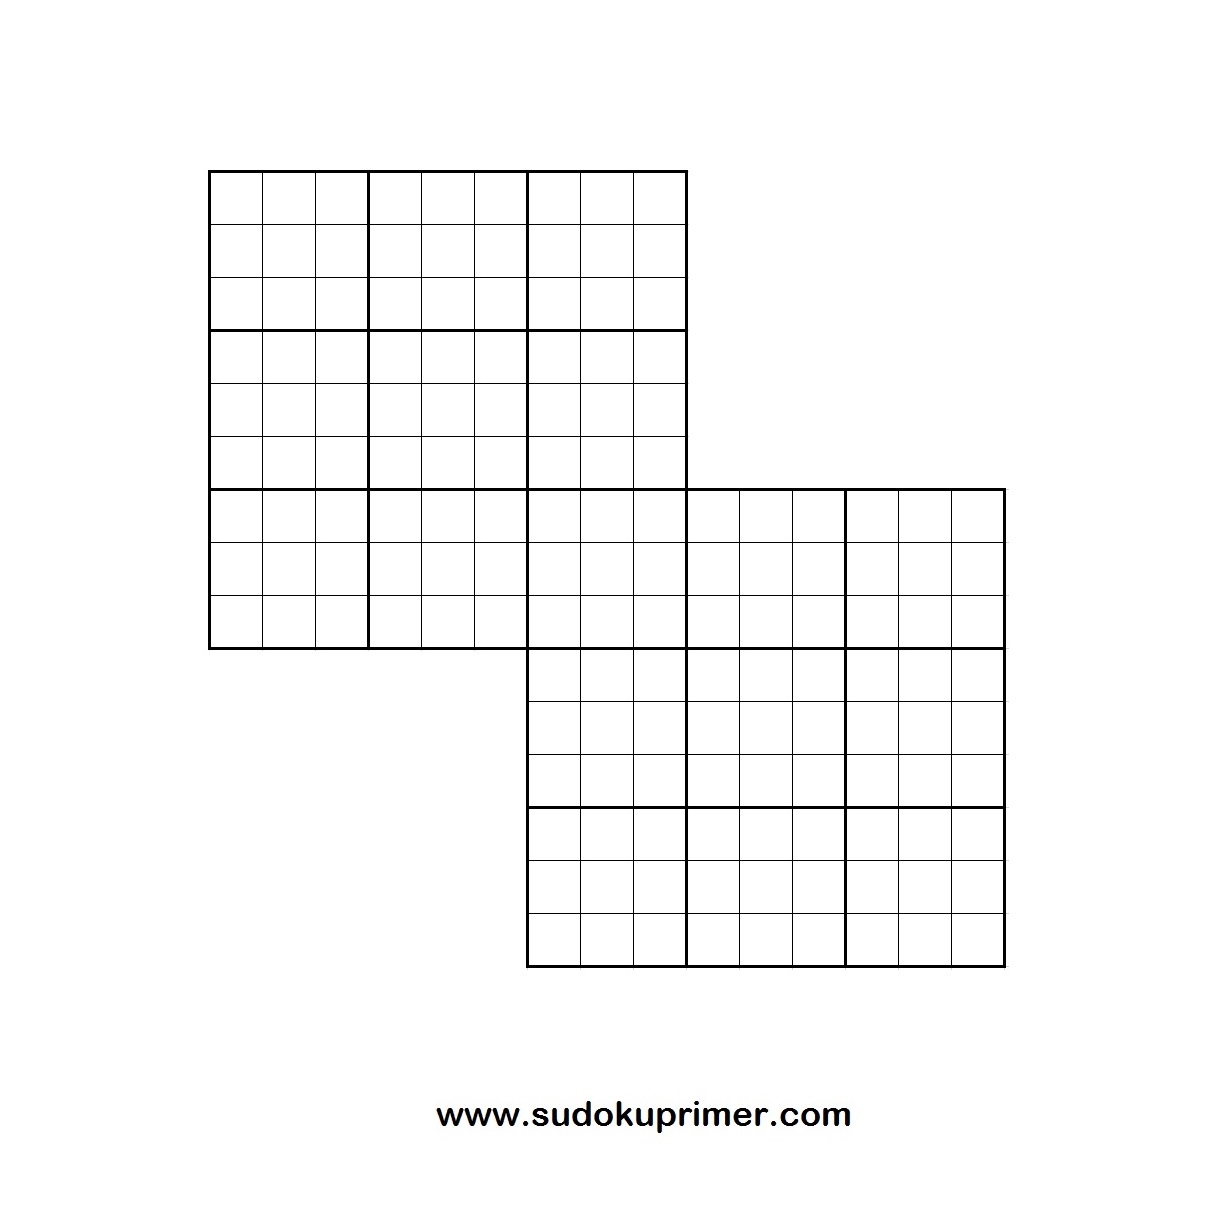 1 x 1 classic overlapping sudoku blank grid in .jpg format